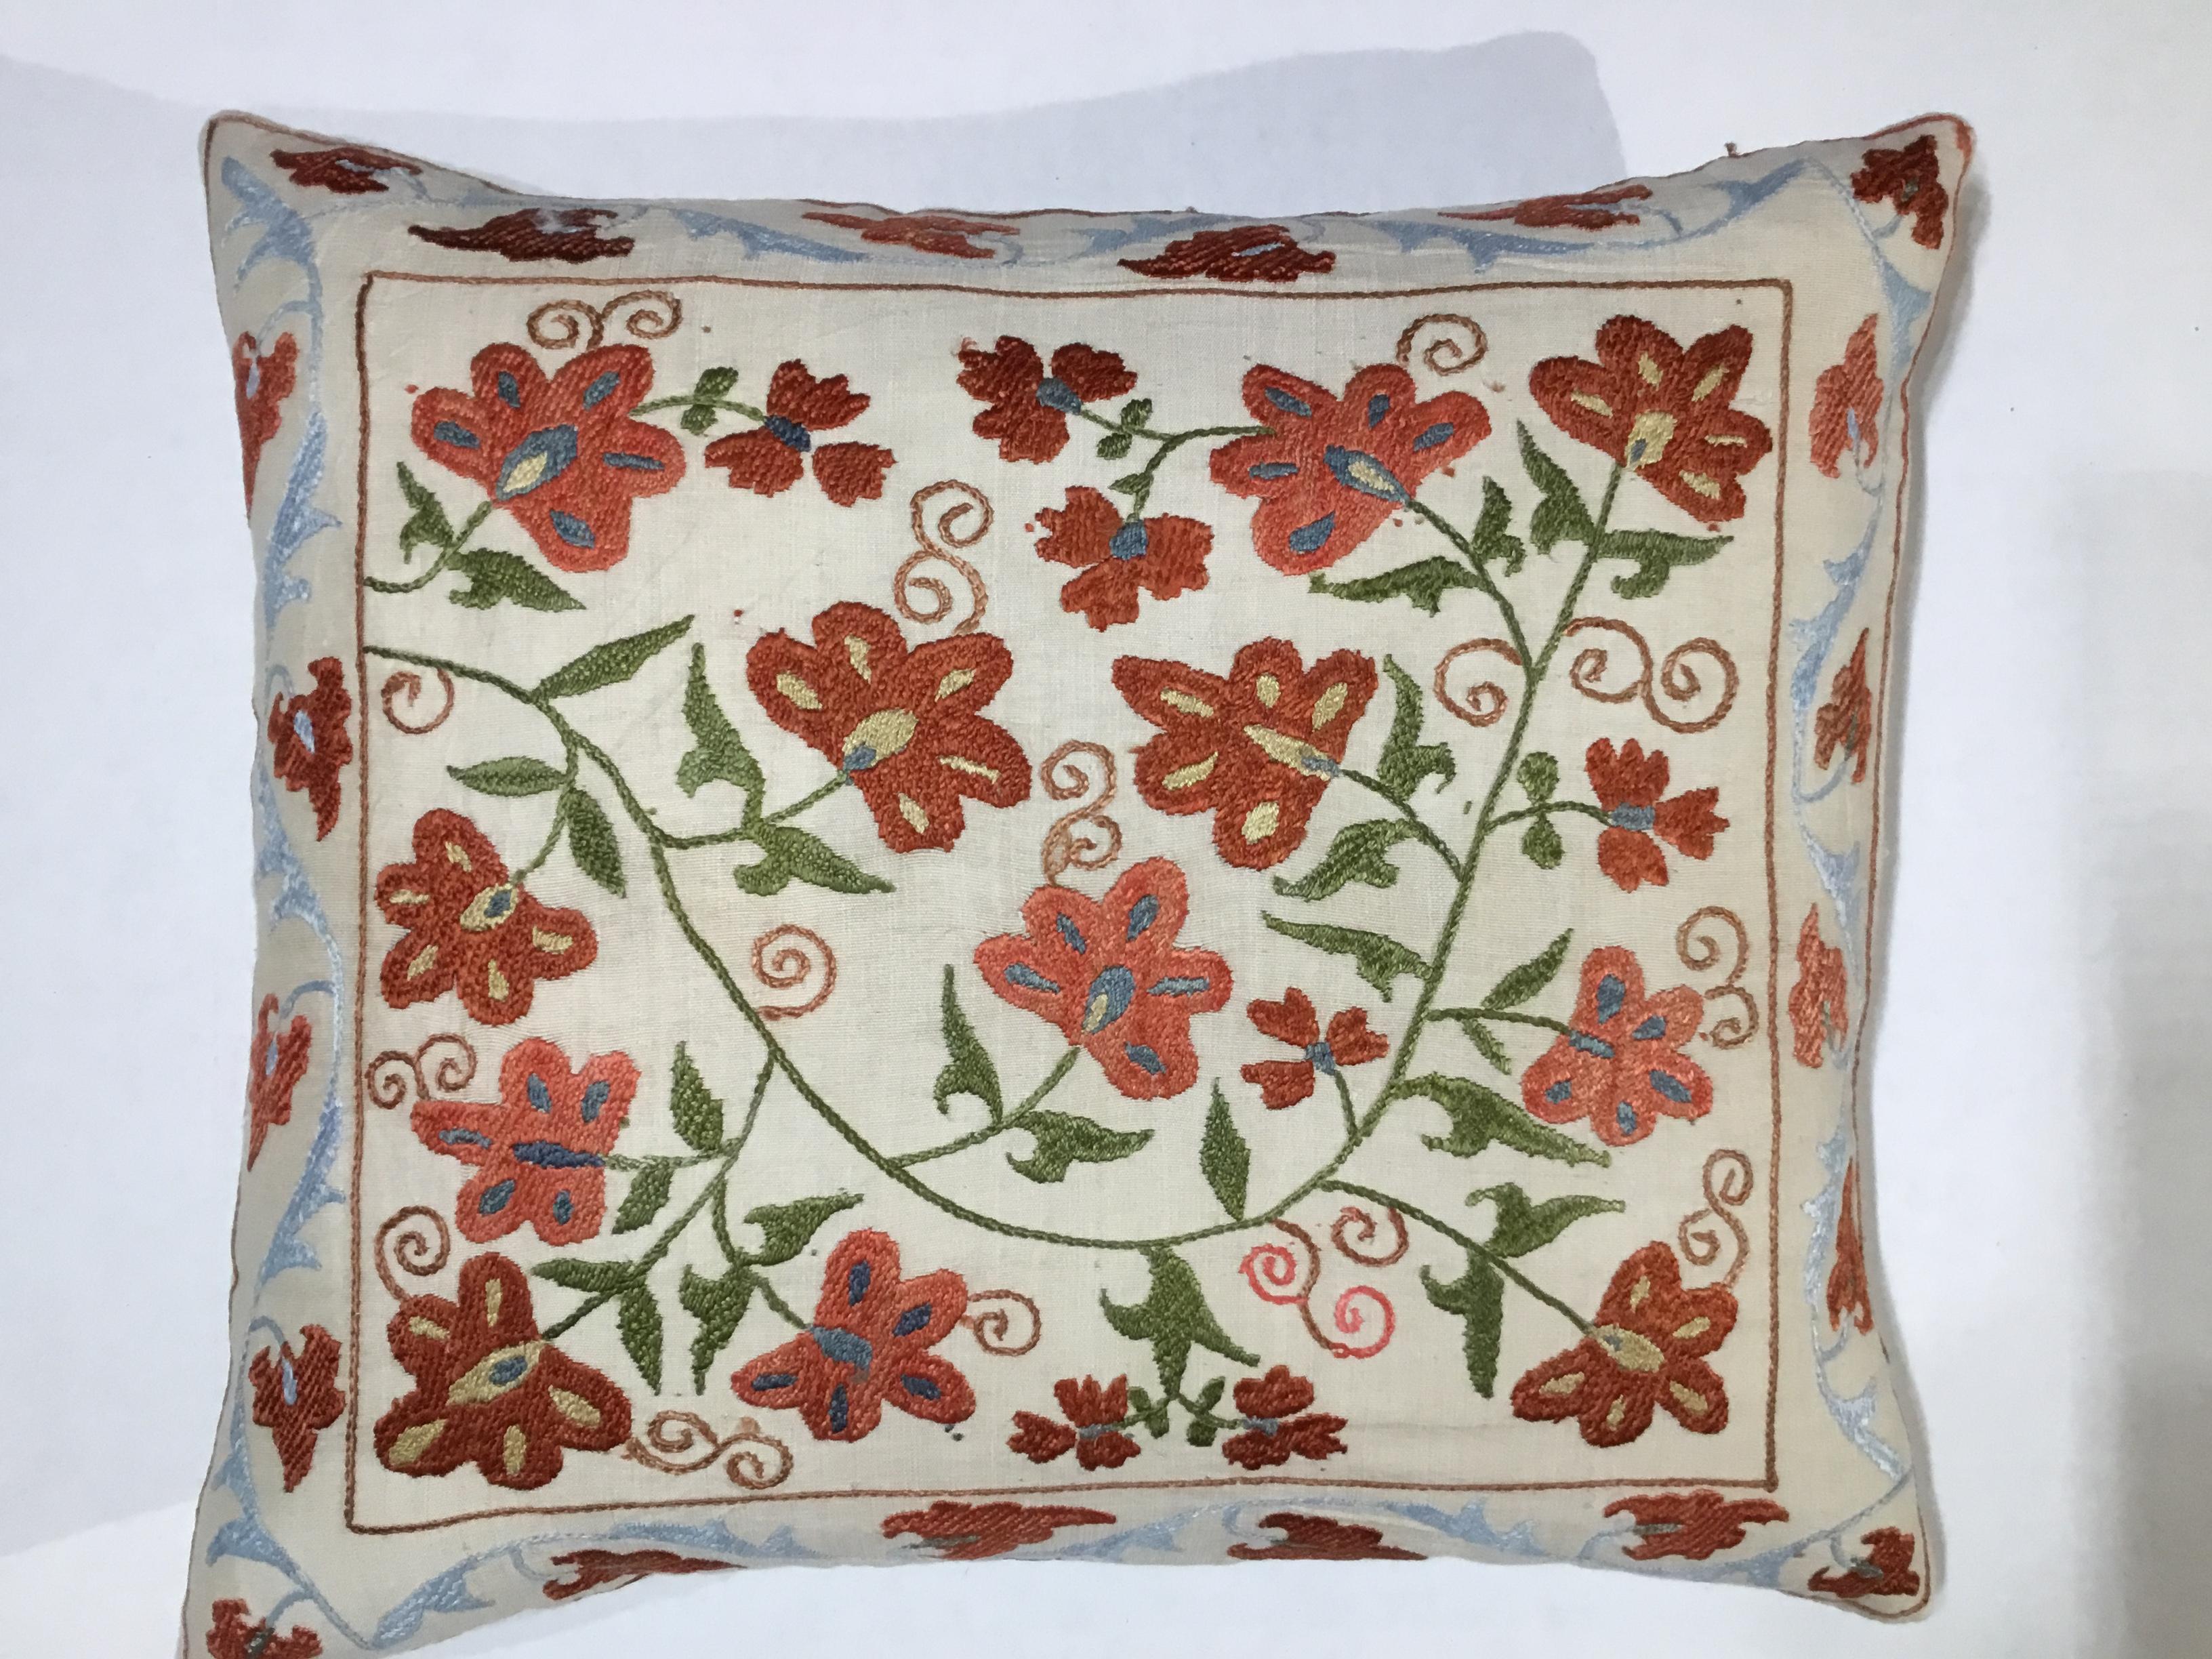 Beautiful pillow made of hand embroidery silk on cream color cotton background, of flowers and vine motifs. Cotton baking with zipper, Fresh new insert.